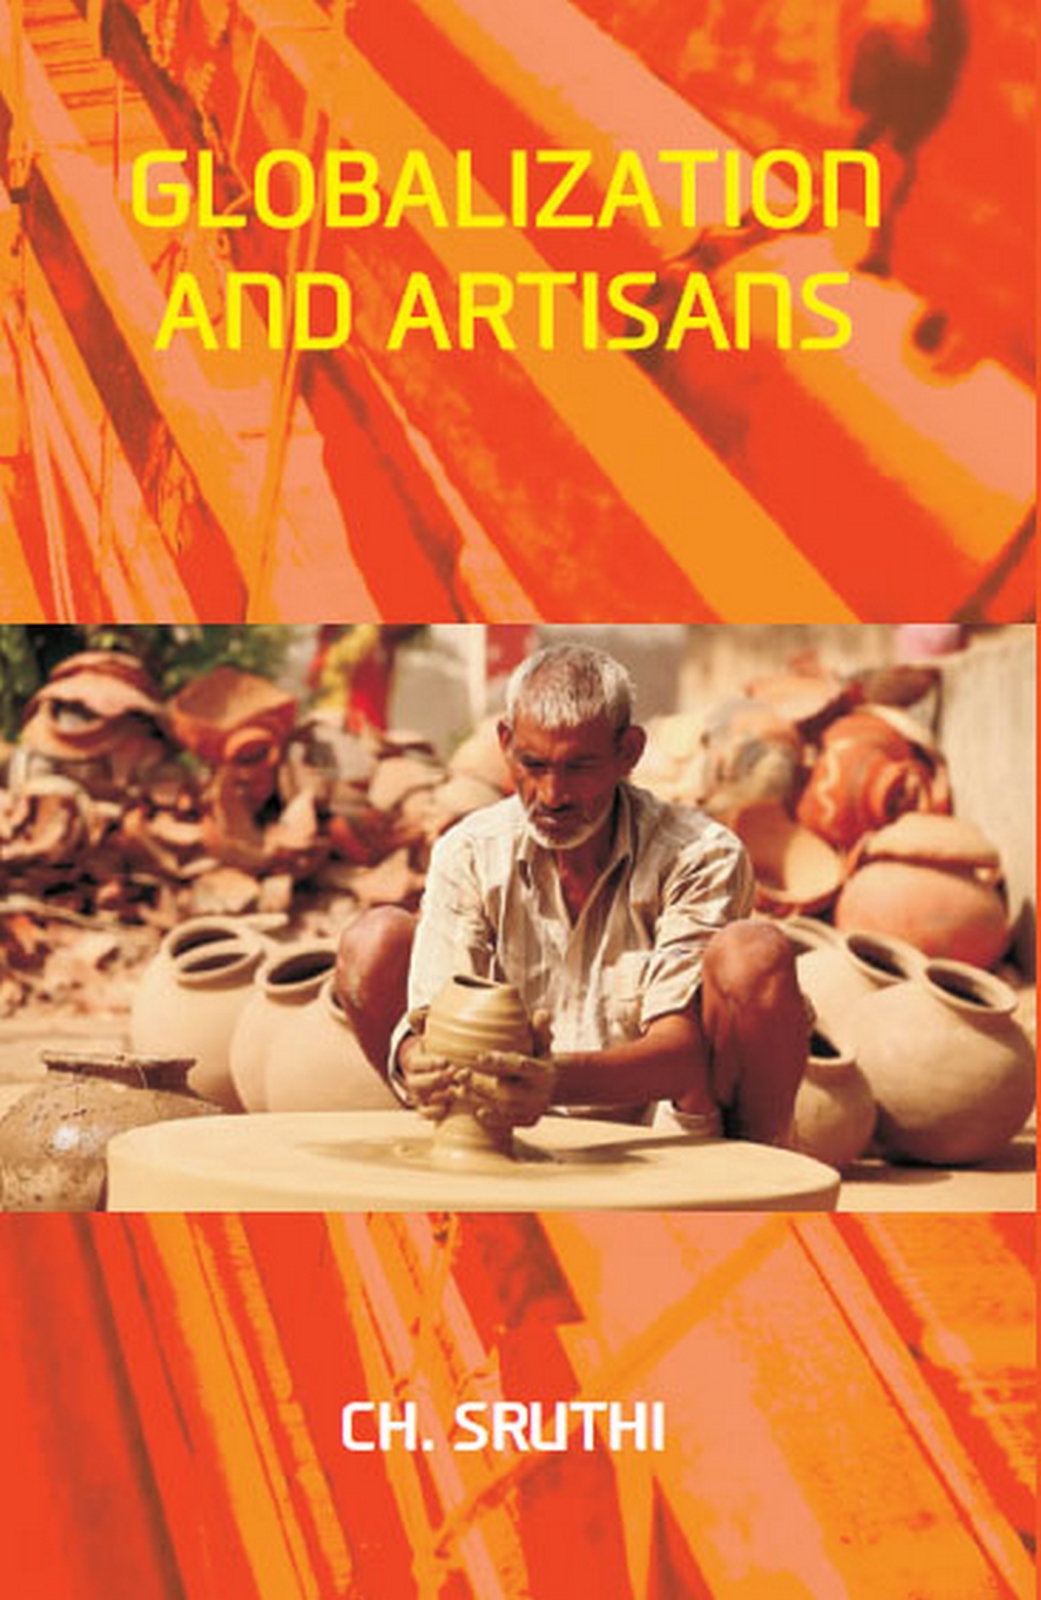 Globalization and Artisans